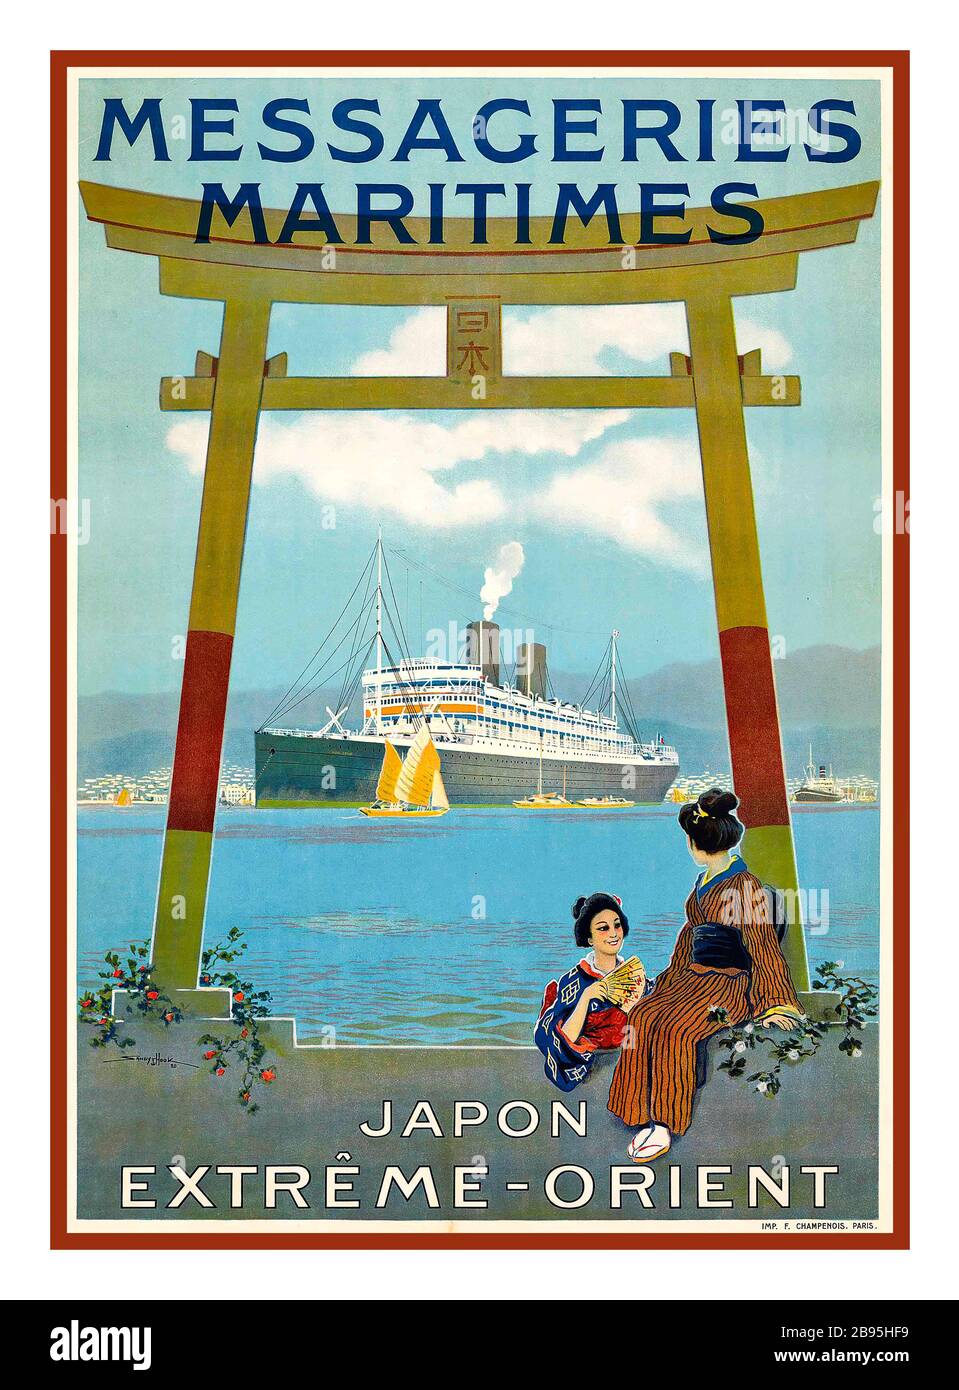 Vintage 1920s Travel Steamship Courier Post Postal Mail Liner poster MESSAGERIES MARITIMES, JAPON lithograph in colours, 1920, printed by F.Champenois, Paris, maritime couriers Japan extreme-orient (Georges Taboreau, 1879-1960) Stock Photo